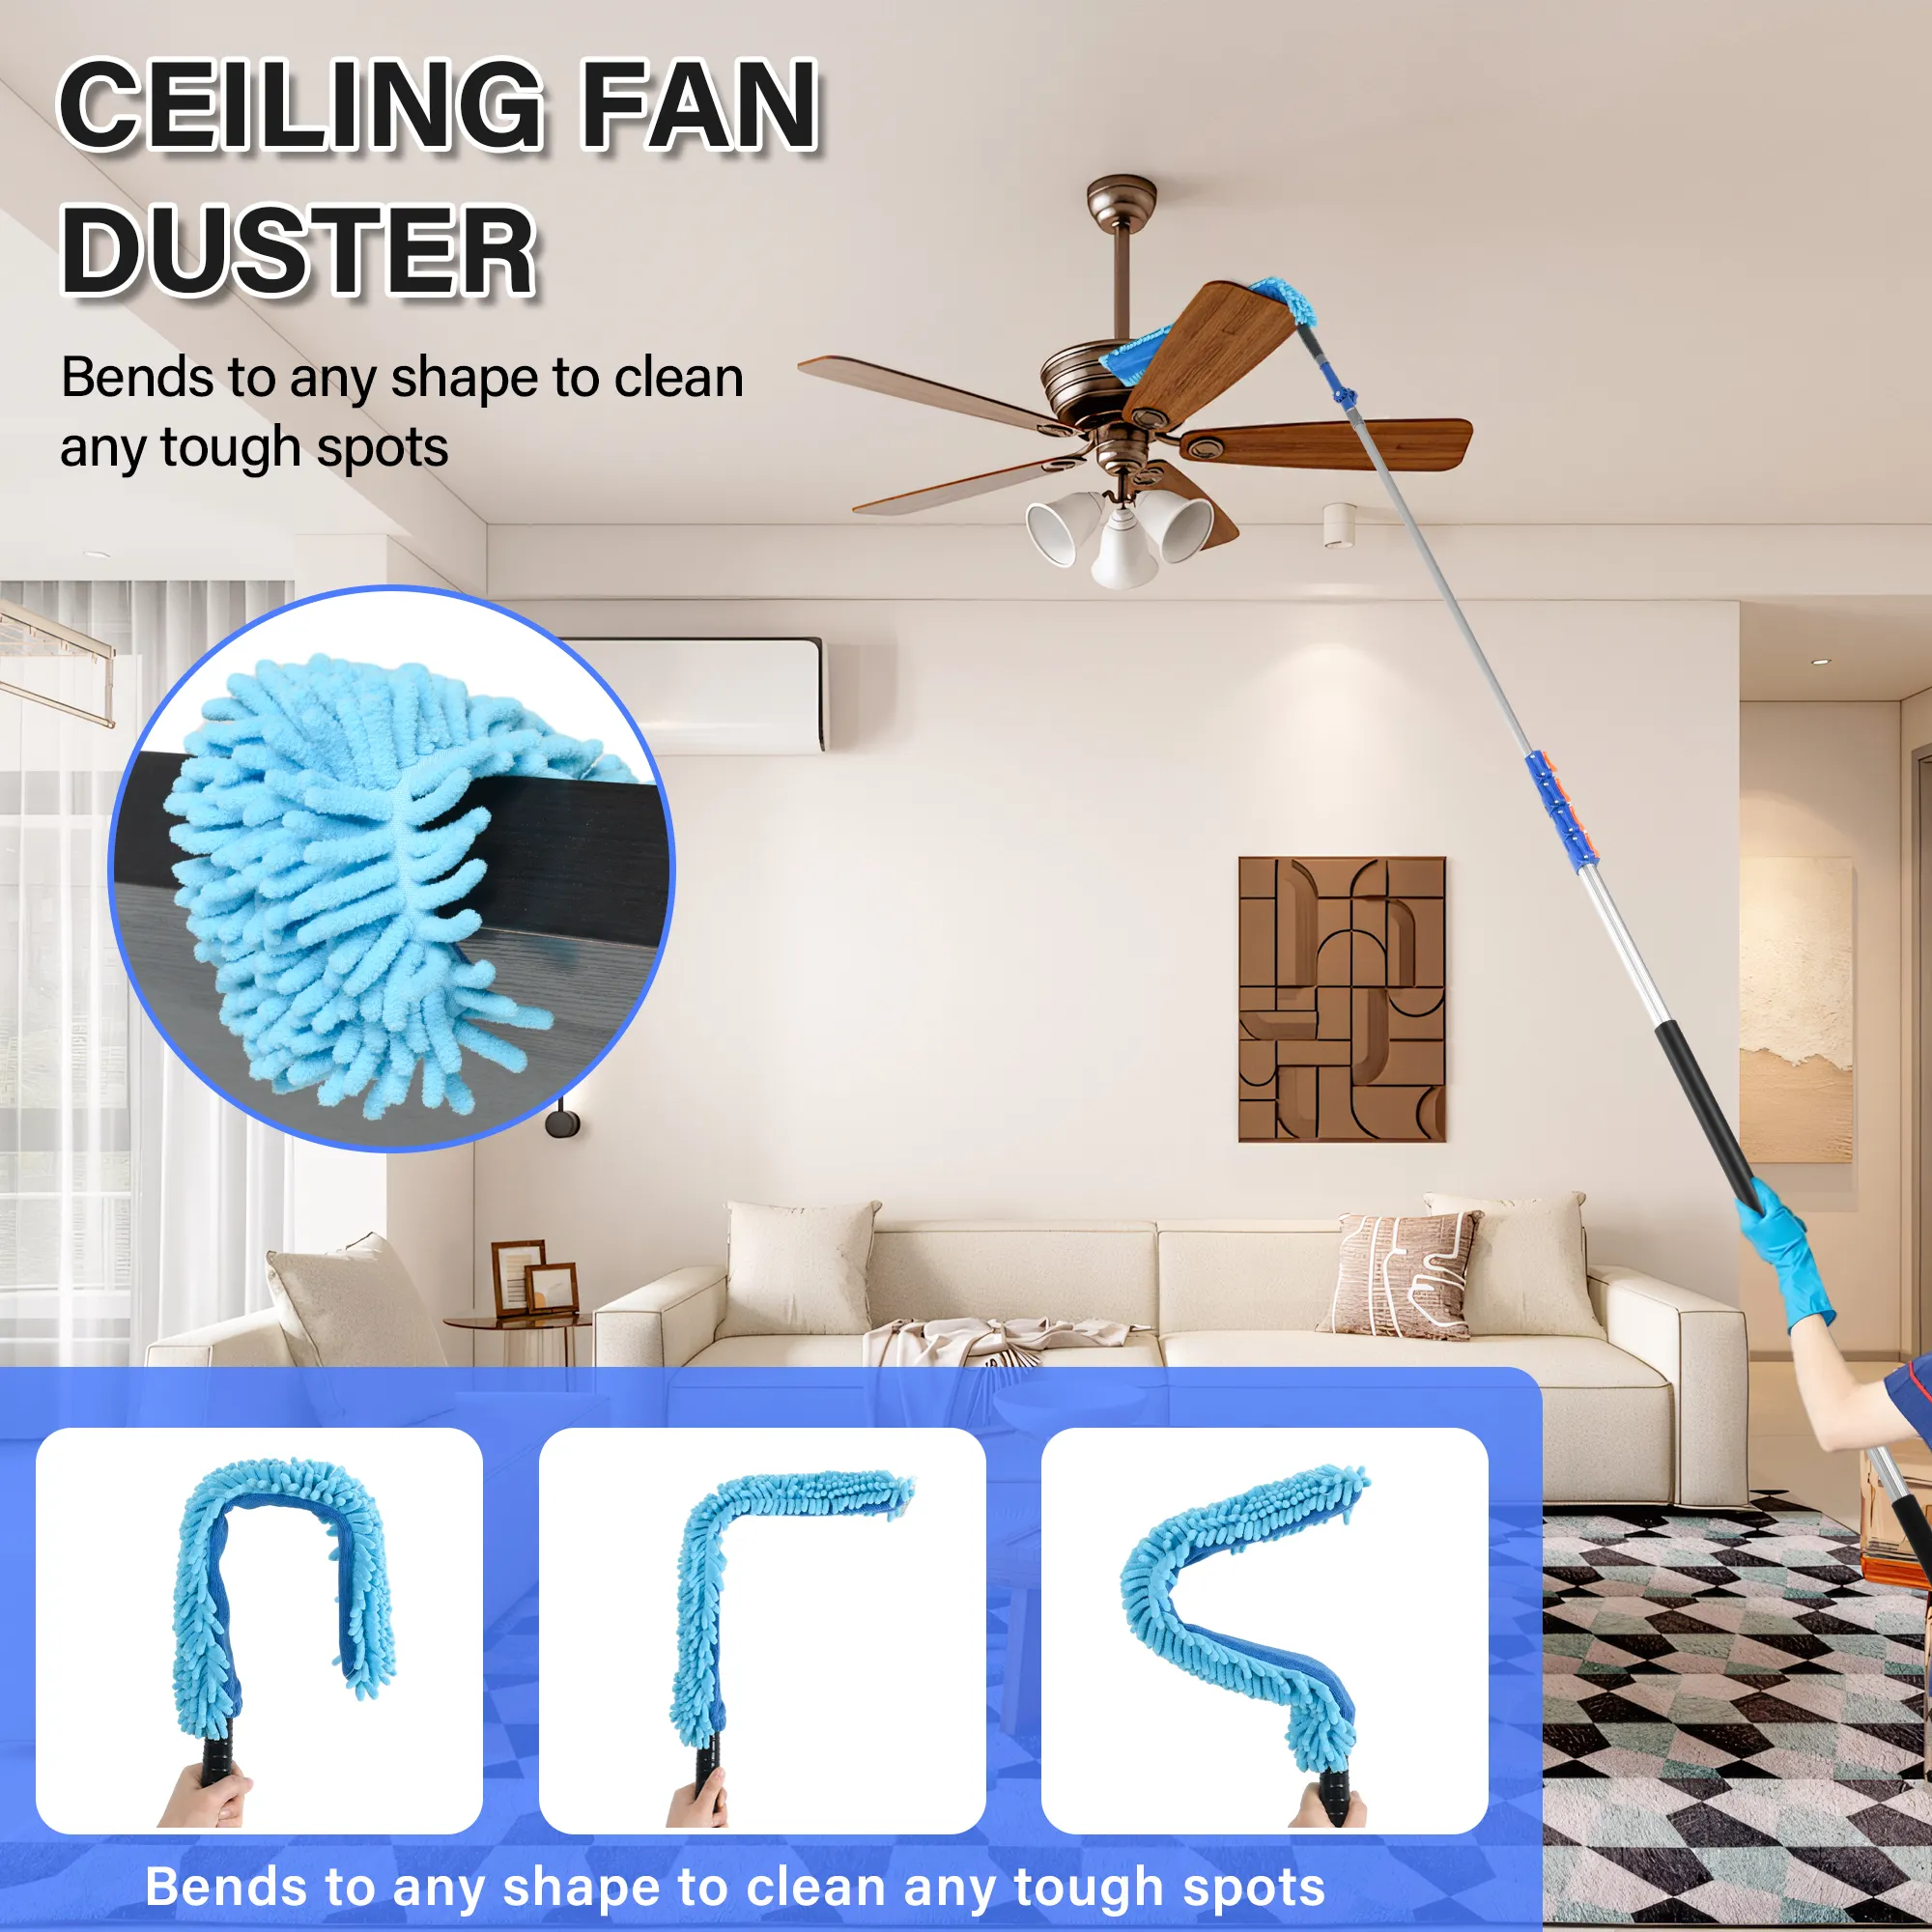 Multi functional long handle telescopic cleaning tools kit with window brush and ultra-fine with 6-24 foot telescopic rod